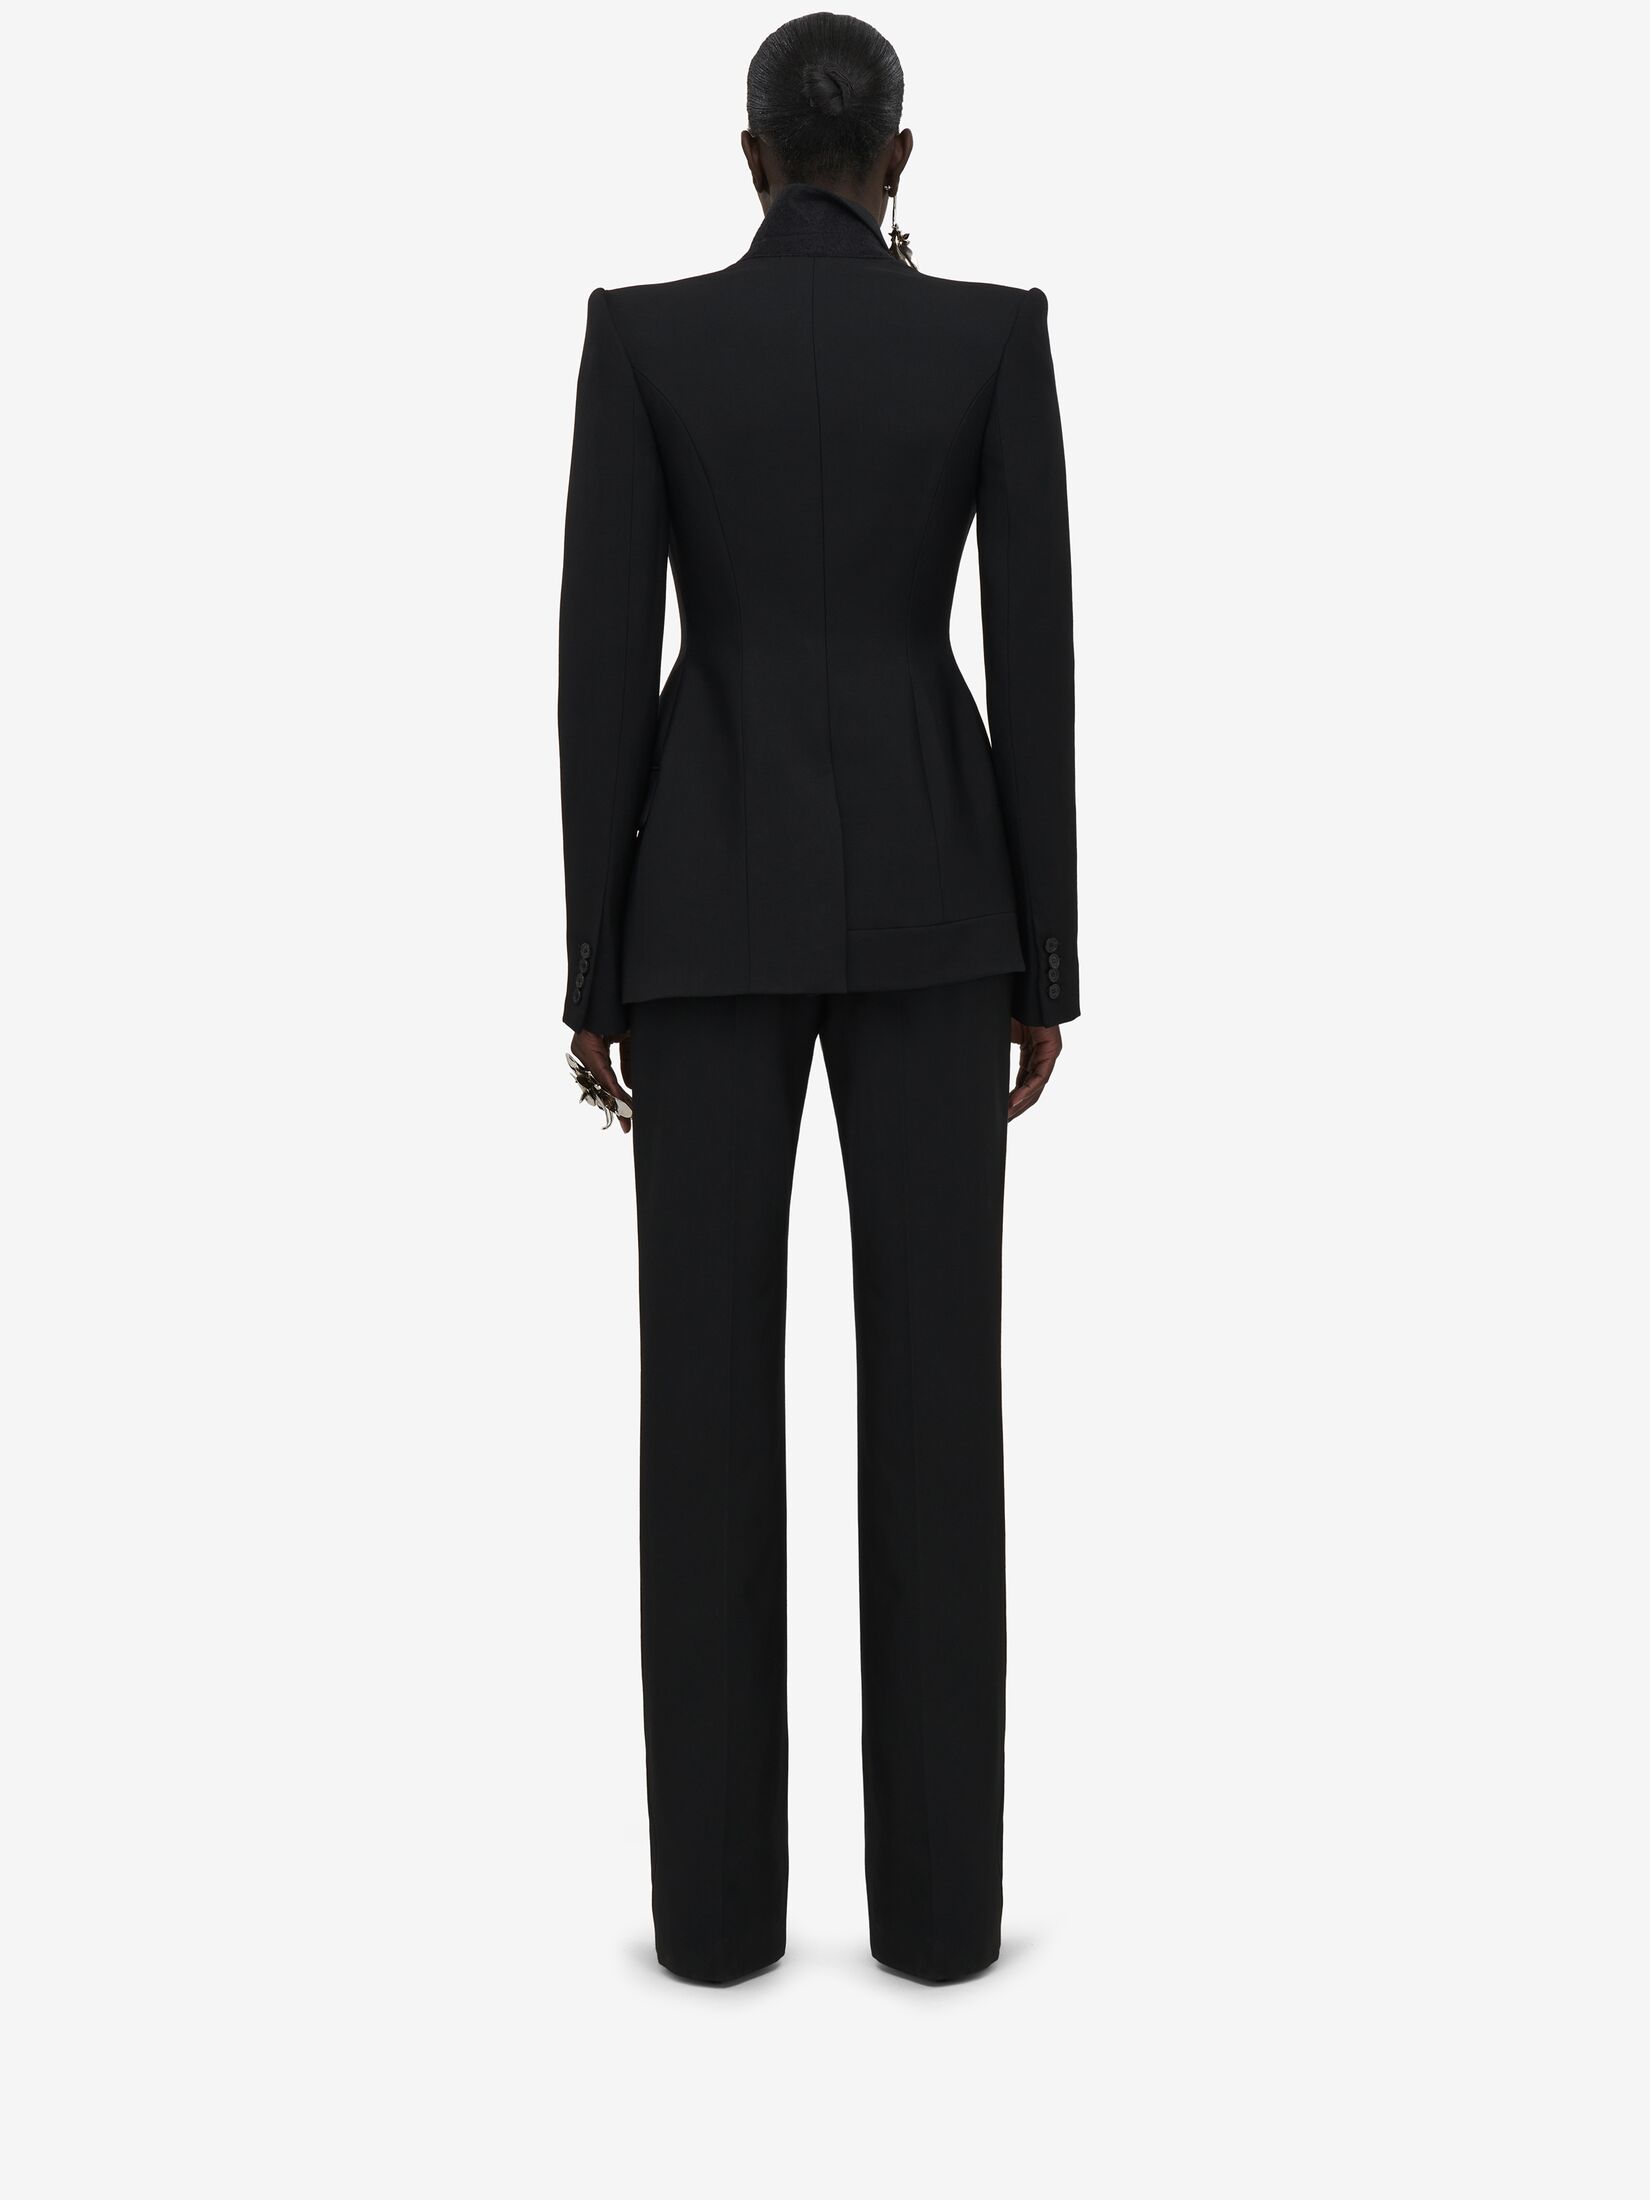 High Waisted Tapered Trousers, Black Dressy Tuxedo Pants for Ladies, Pants  for Women Suit, Elegant Slim Leg Formal Pants, Tailored Pants 